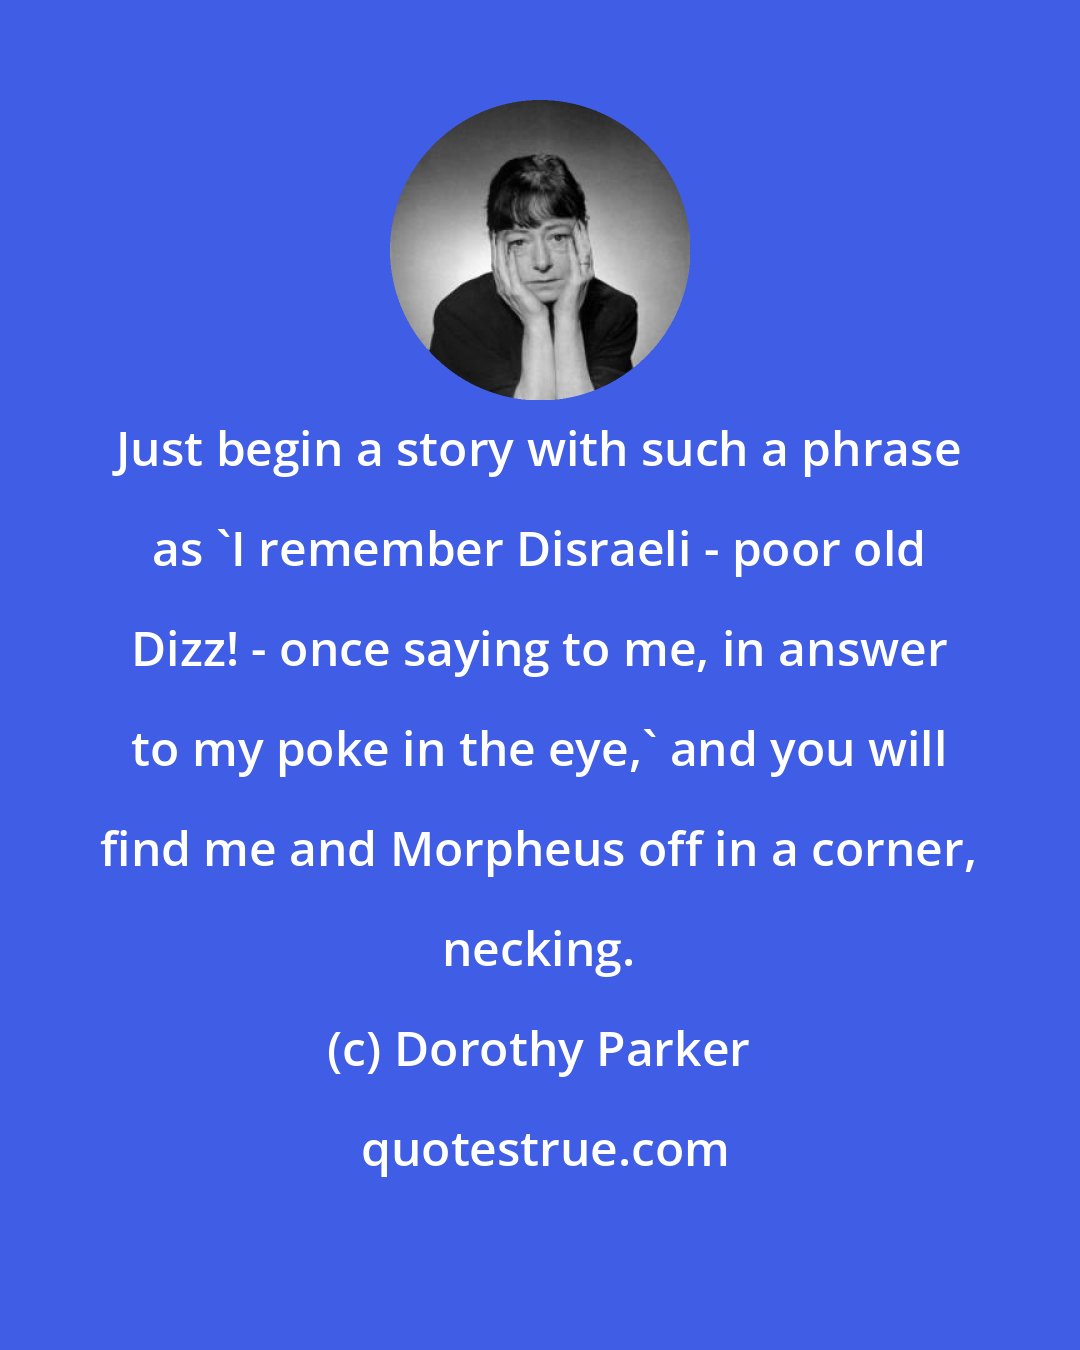 Dorothy Parker: Just begin a story with such a phrase as 'I remember Disraeli - poor old Dizz! - once saying to me, in answer to my poke in the eye,' and you will find me and Morpheus off in a corner, necking.